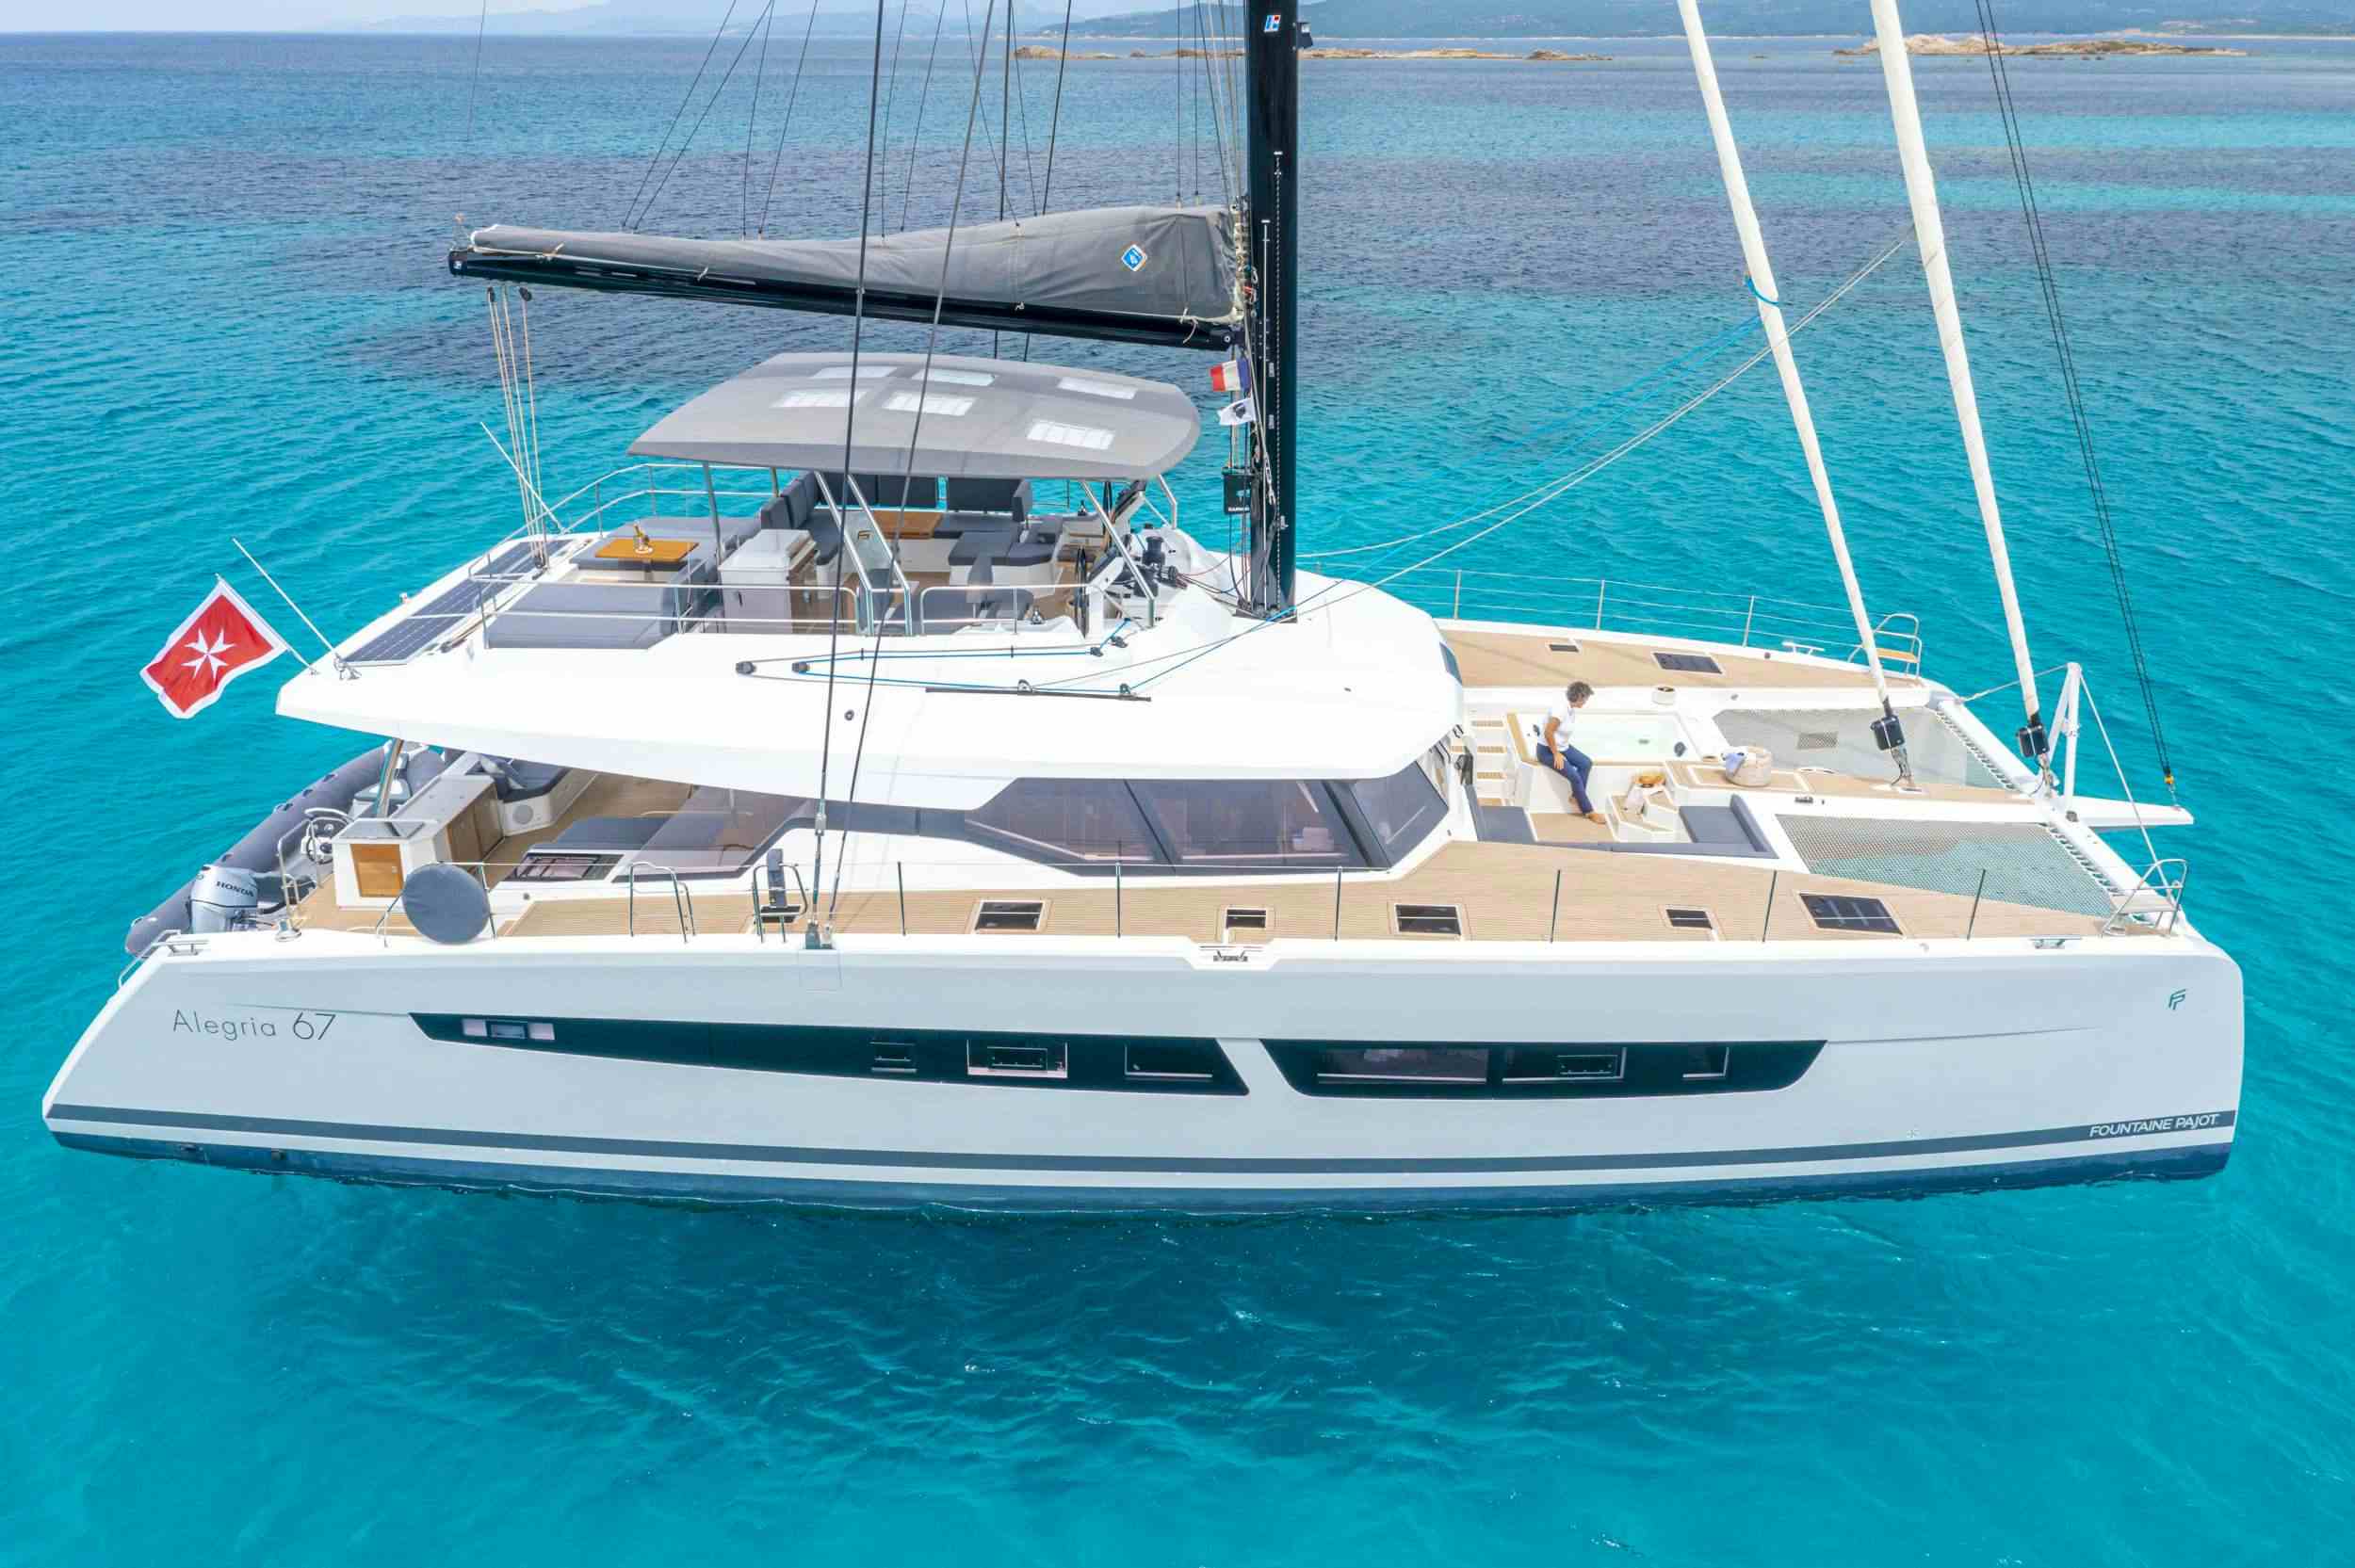 SEMPER FIDELIS  - Yacht Charter Guadeloupe & Boat hire in Bahamas & Caribbean 1